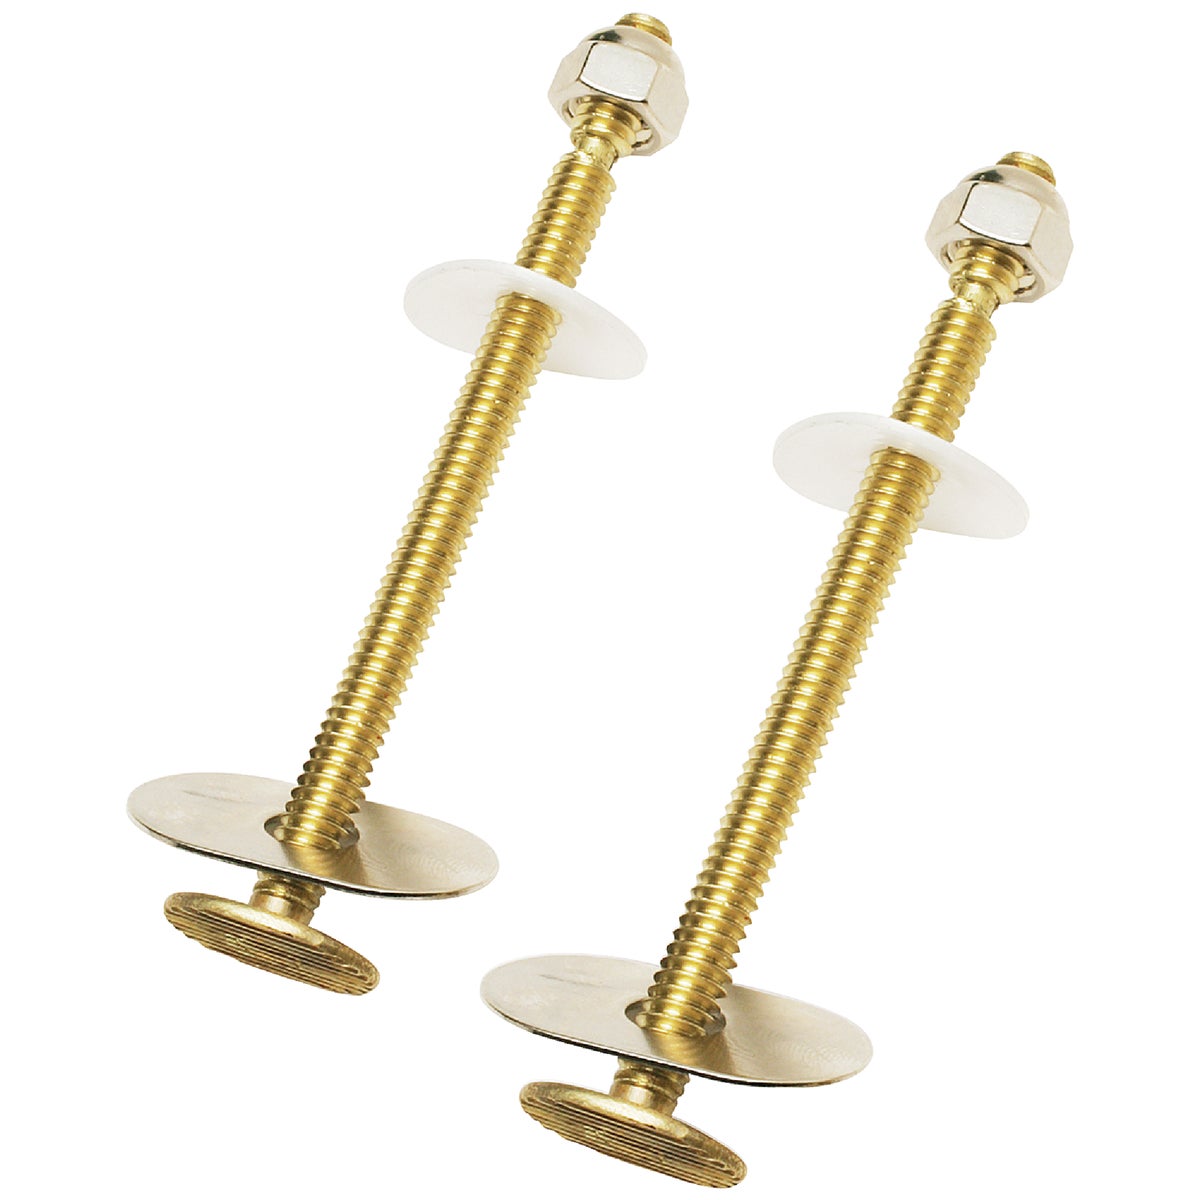 Do it 1/4 In. x 3-1/2 In. Extra Long Solid Brass Toilet Bolts (2 Pack)